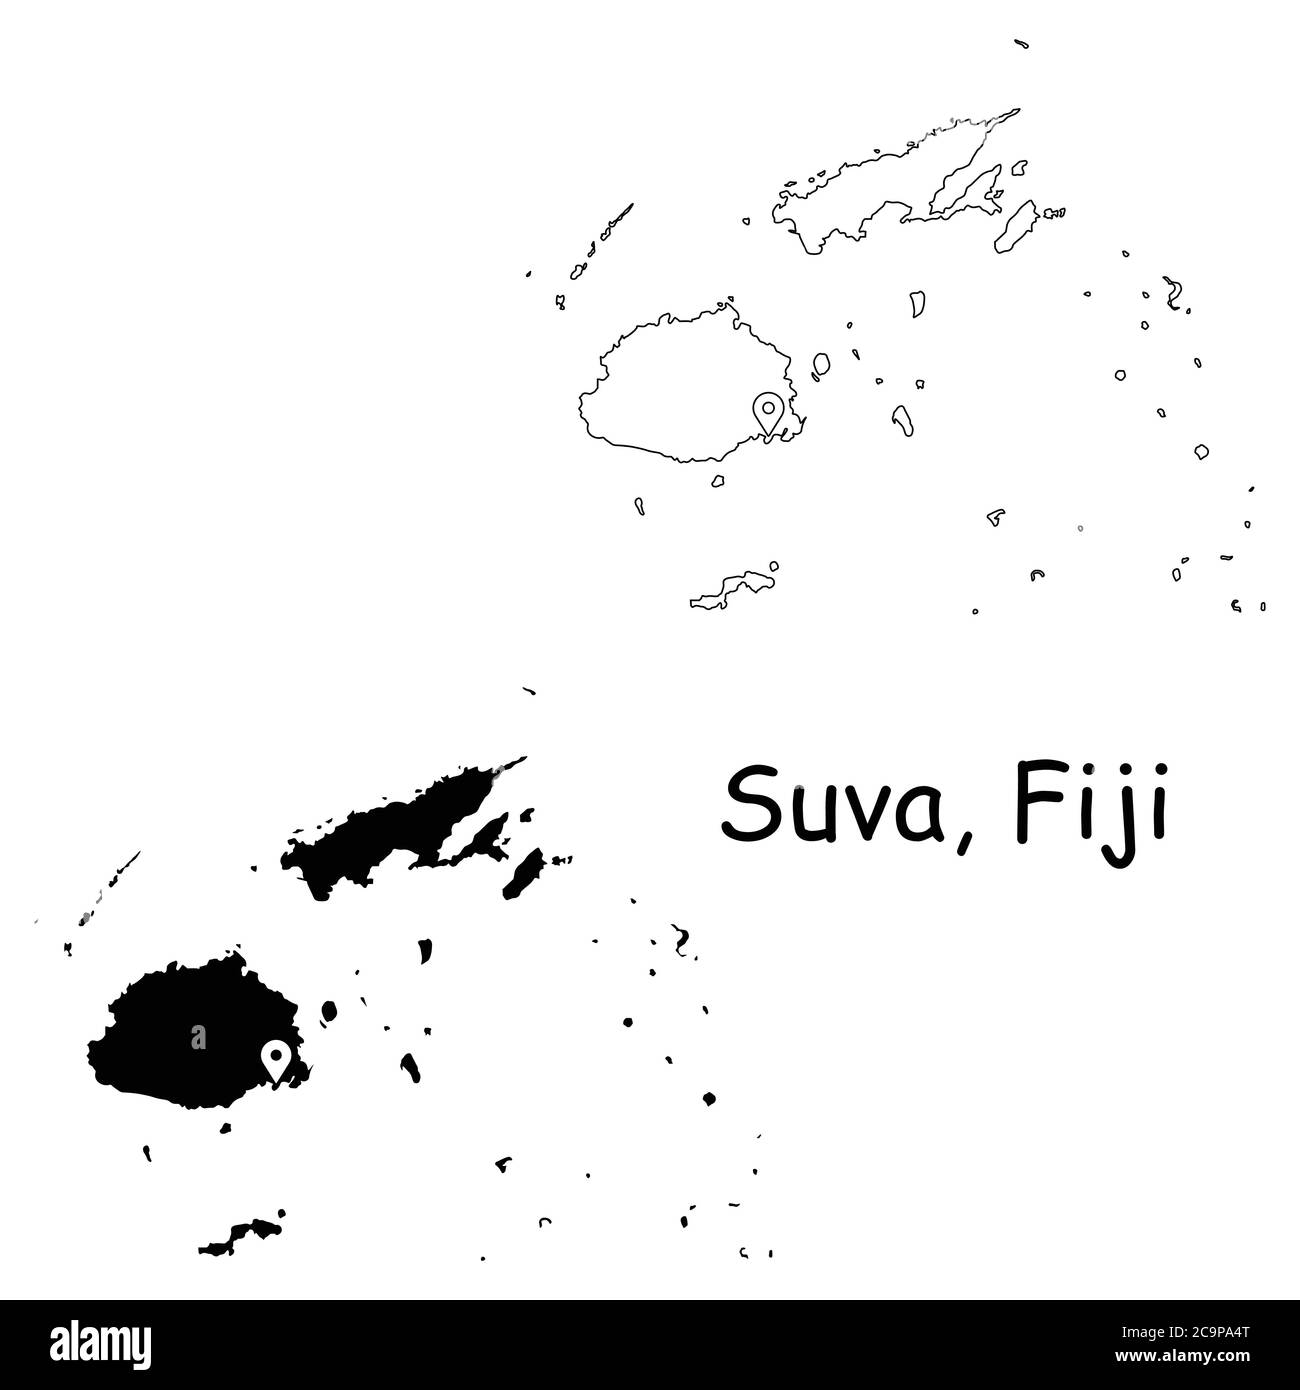 Suva Fiji. Detailed Country Map with Location Pin on Capital City. Black silhouette and outline maps isolated on white background. EPS Vector Stock Vector